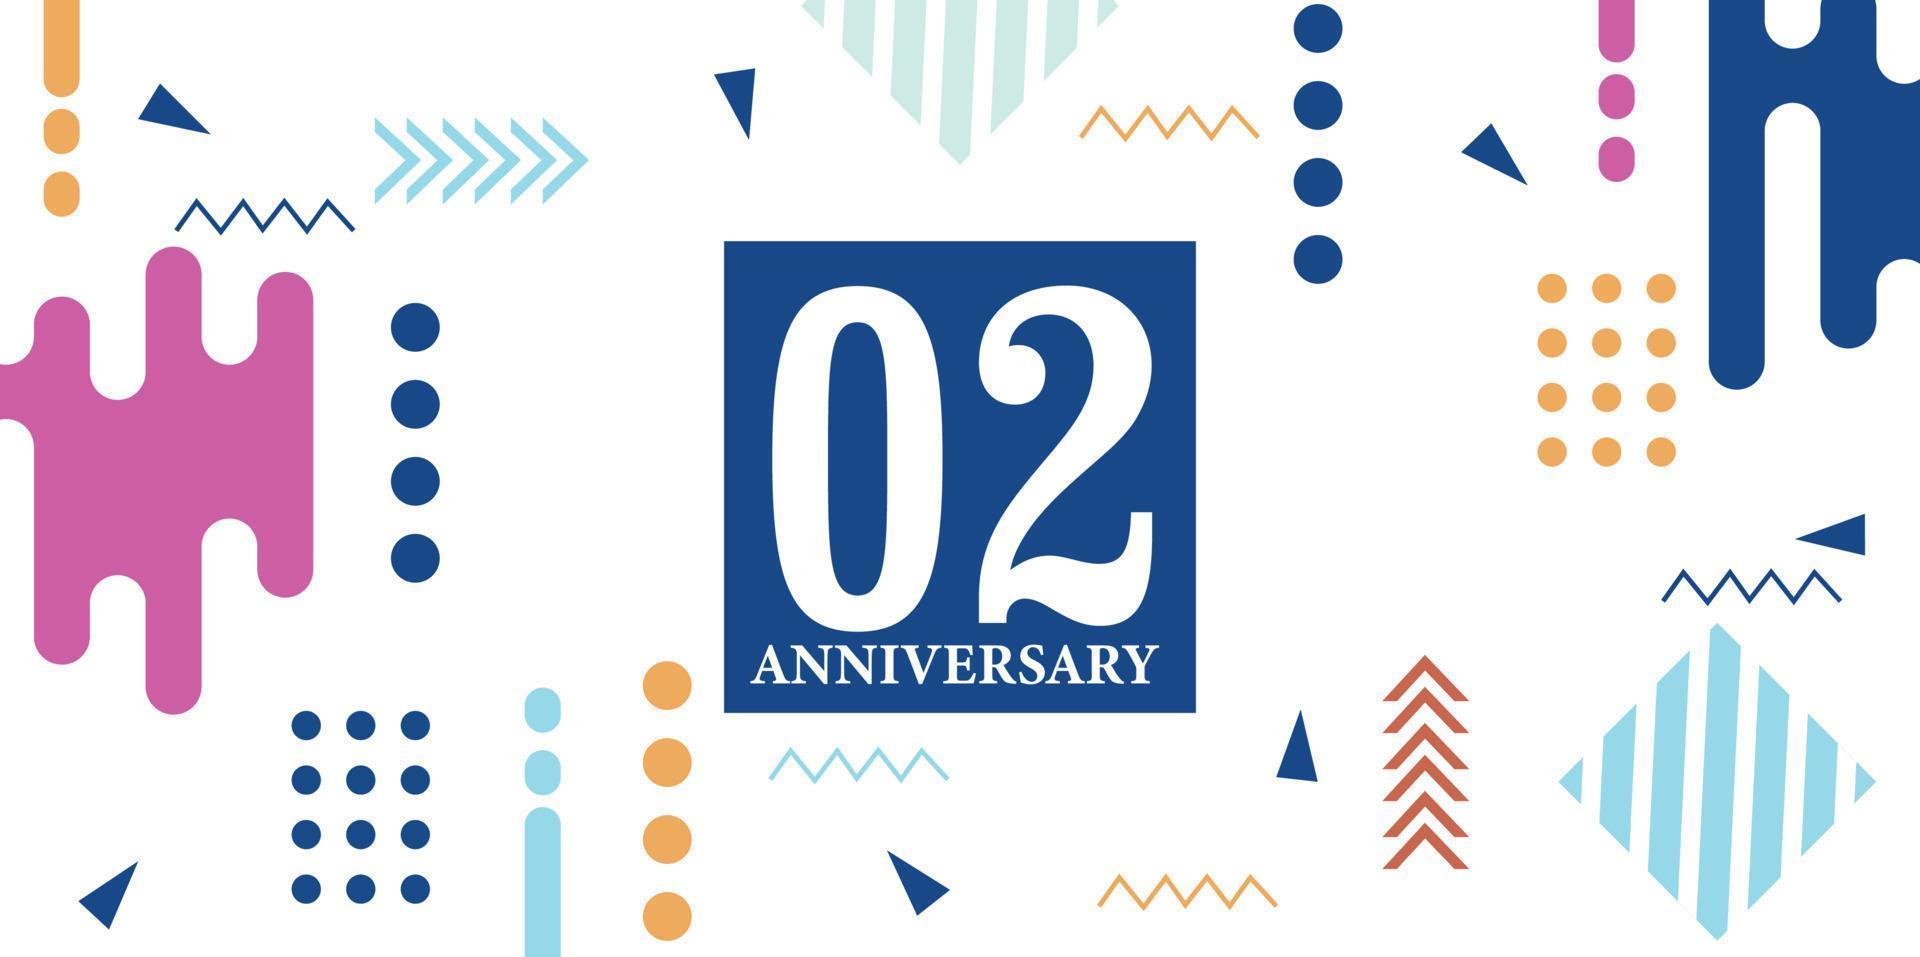 02 years anniversary celebration logotype white numbers font in blue shape with colorful abstract design on white background vector illustration